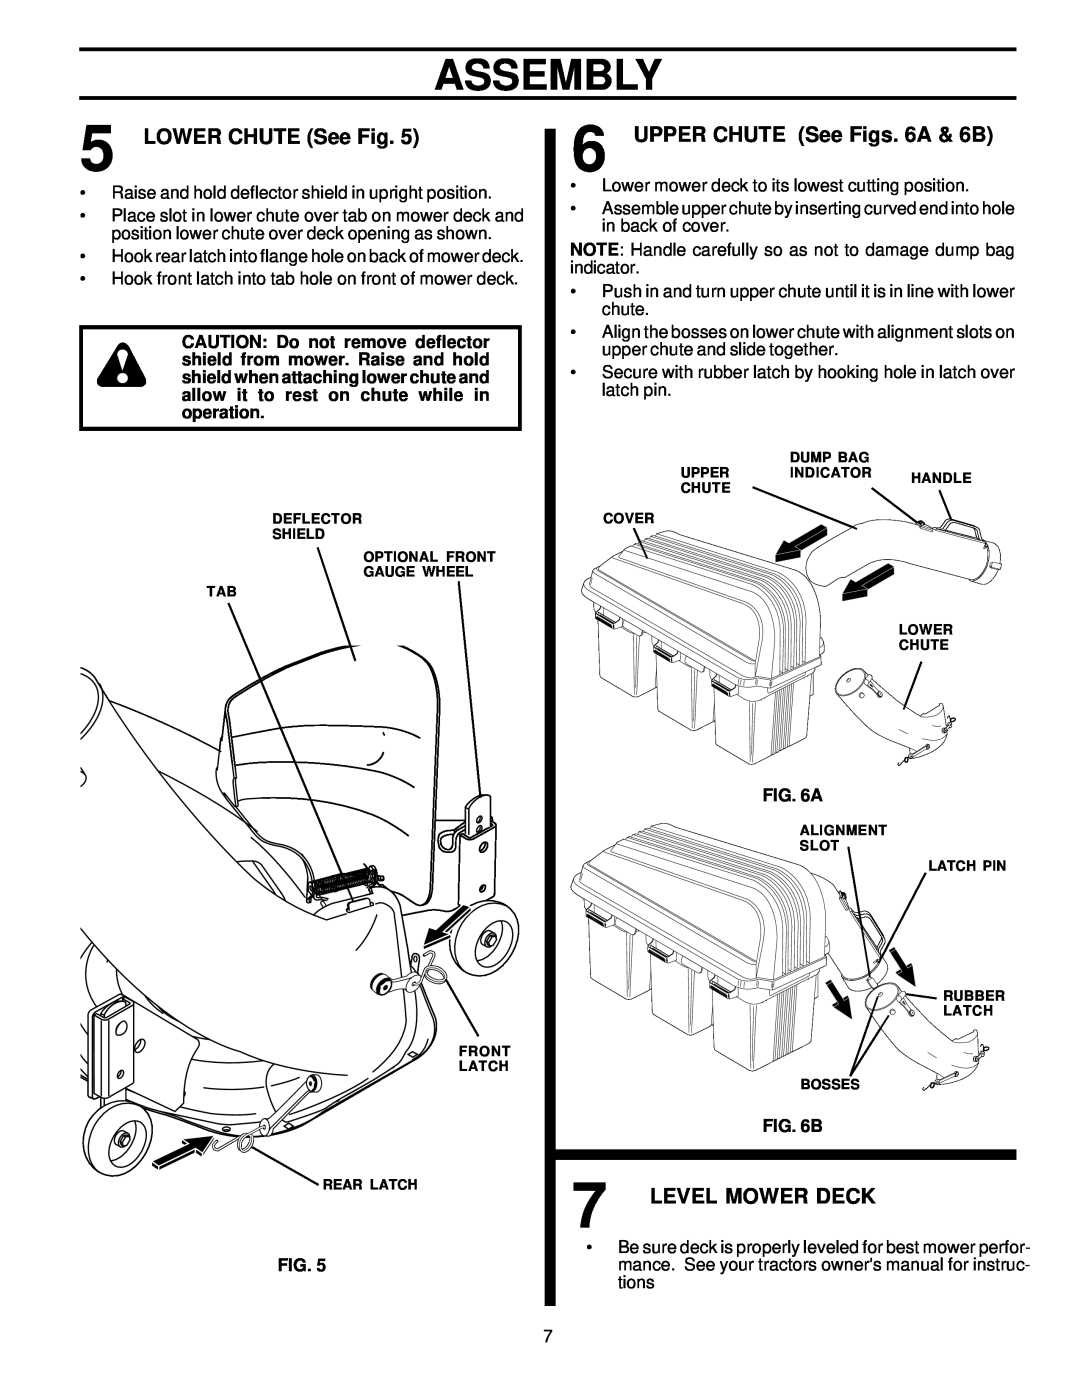 Husqvarna LTB48A owner manual LOWER CHUTE See Fig, UPPER CHUTE See Figs. 6A & 6B, Level Mower Deck, Assembly 